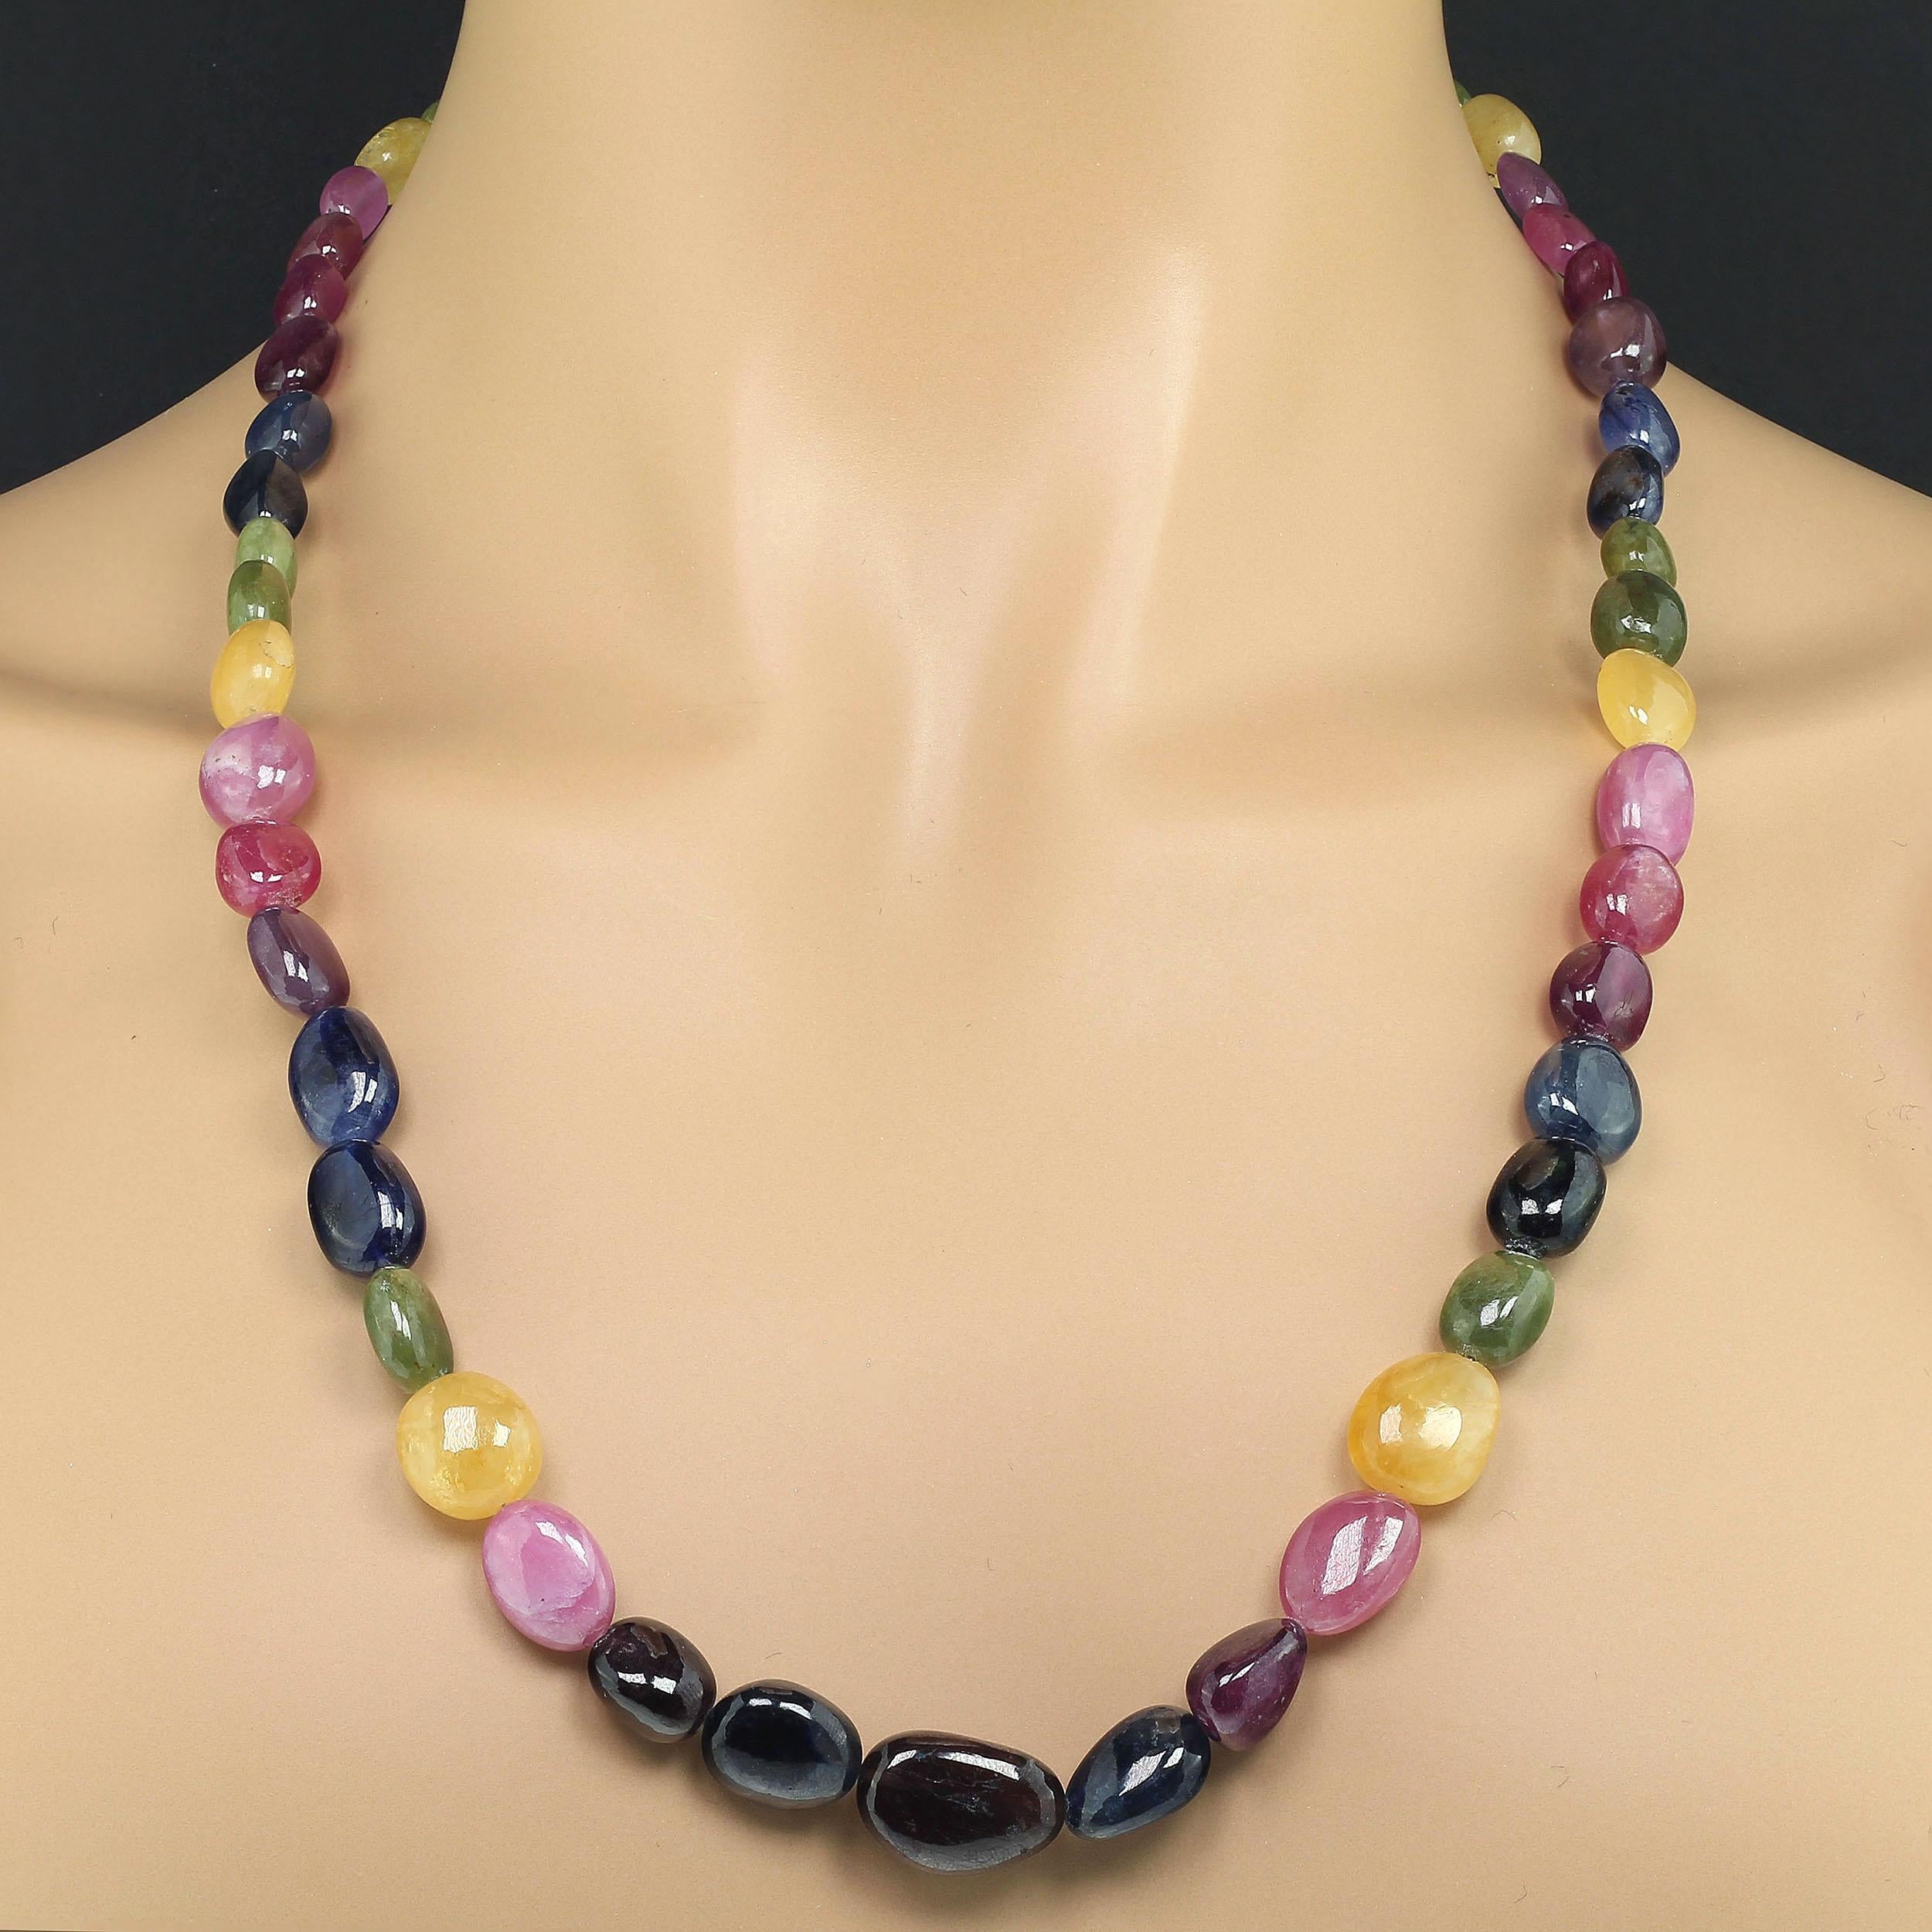 Graduated multi color Sapphire nuggets with a gold vermeil hook and eye clasp necklace. Wearing this spectacular, colorful necklace with everything you own will put you in your happy place. 25 Inches is a great versatile length. These highly